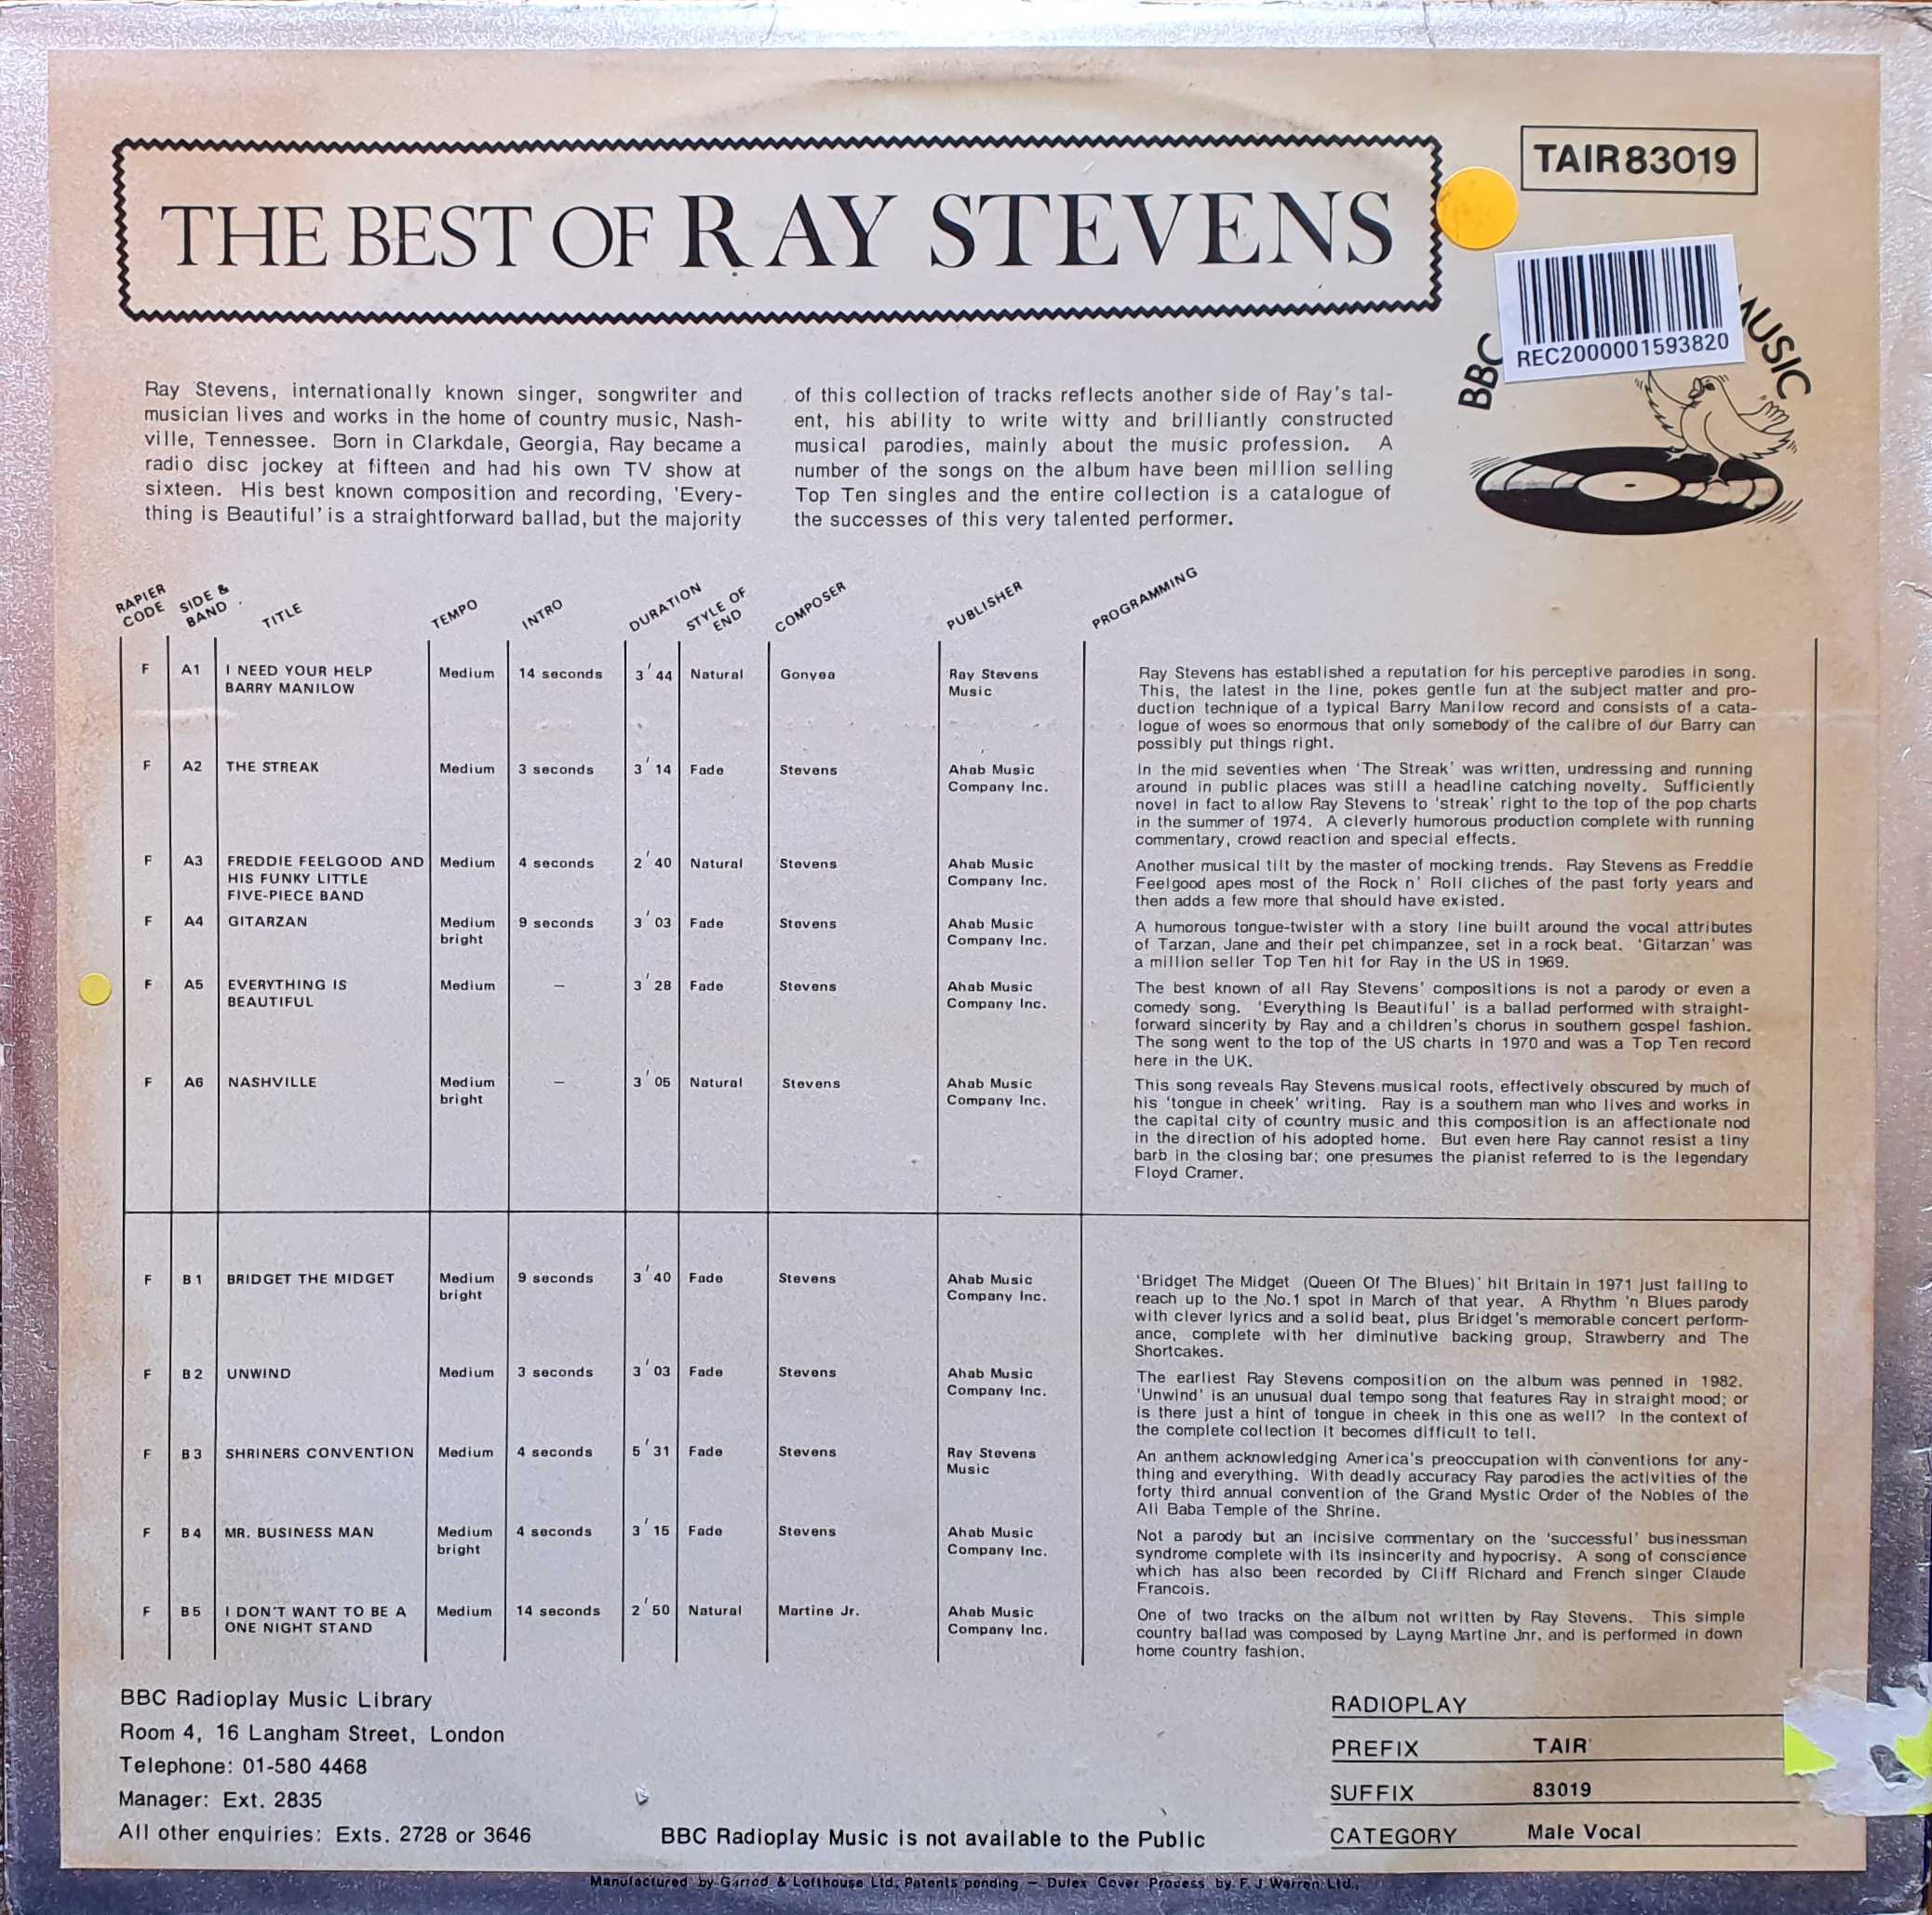 Picture of TAIR 83019 The best of Ray Stevens by artist Ray Stevens from the BBC records and Tapes library